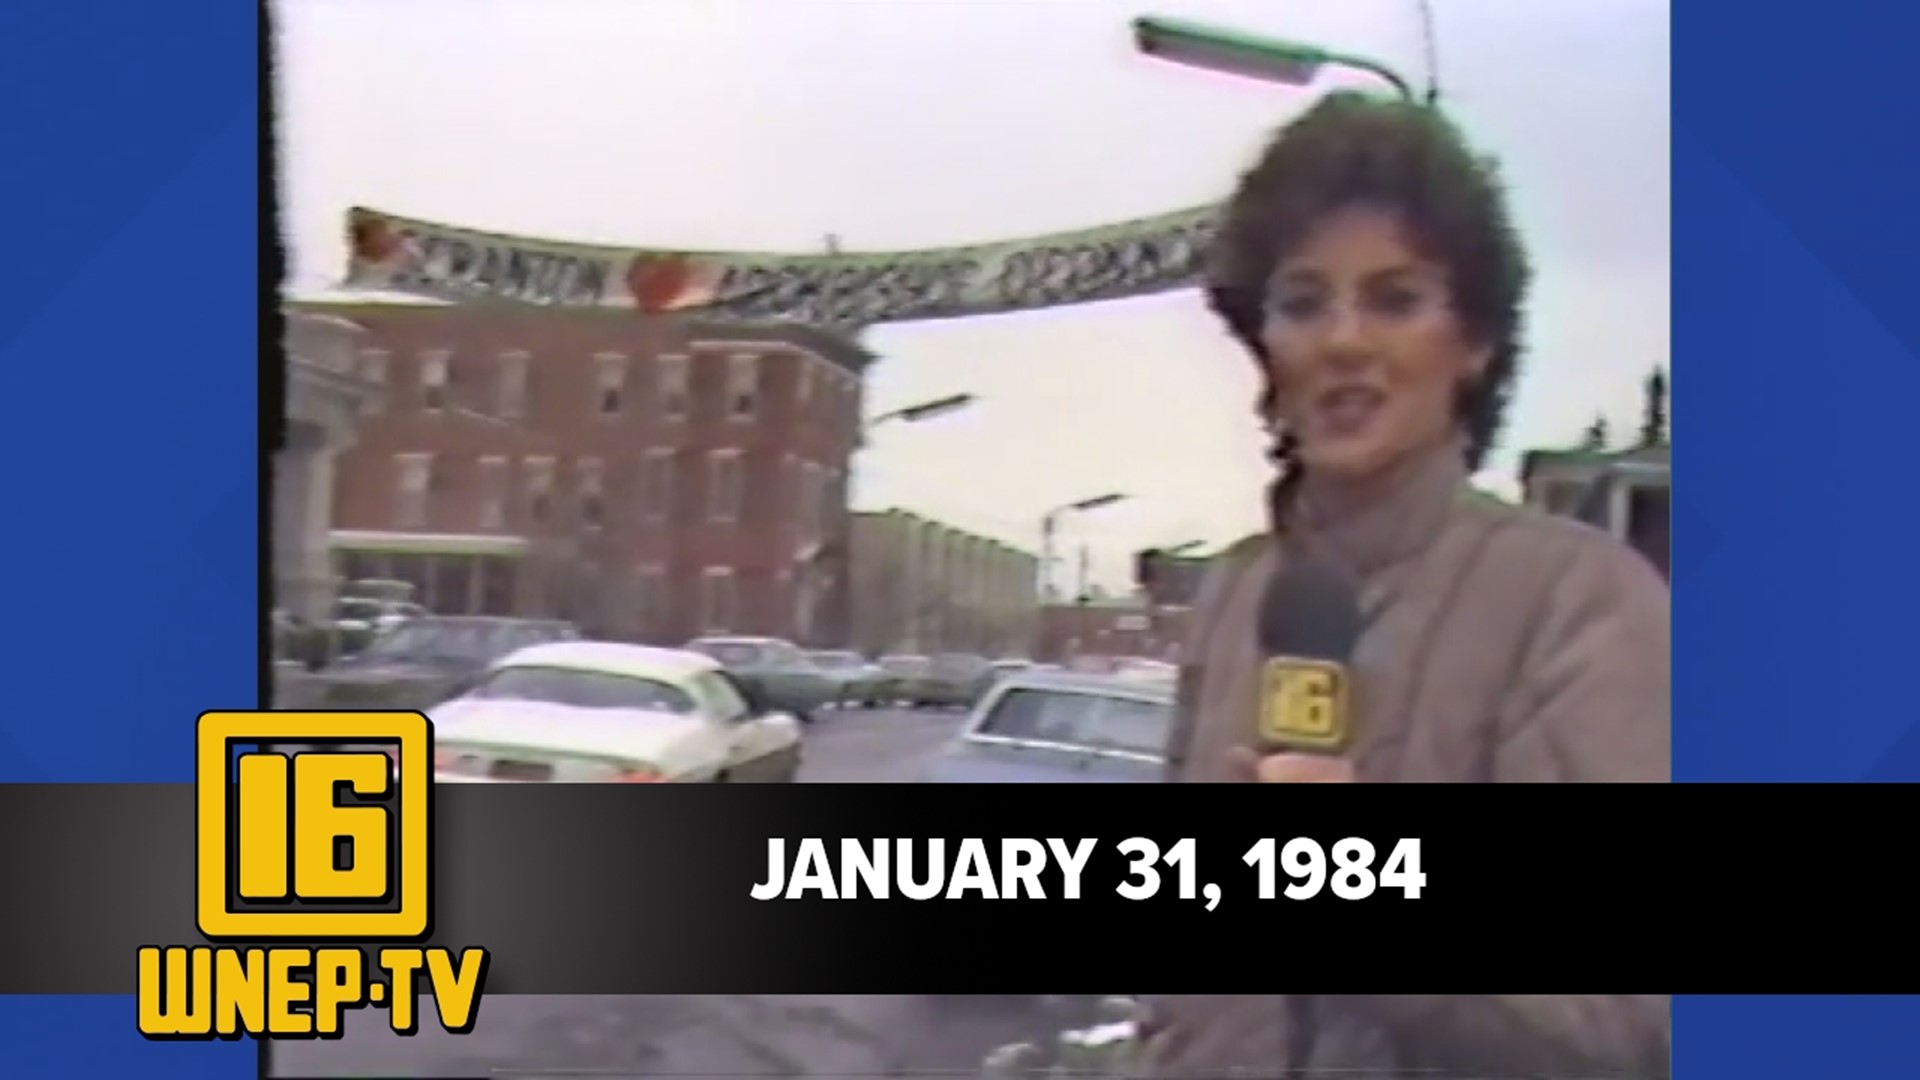 Join Karen Harch and Nolan Johannes with curated stories from January 30, 1984.